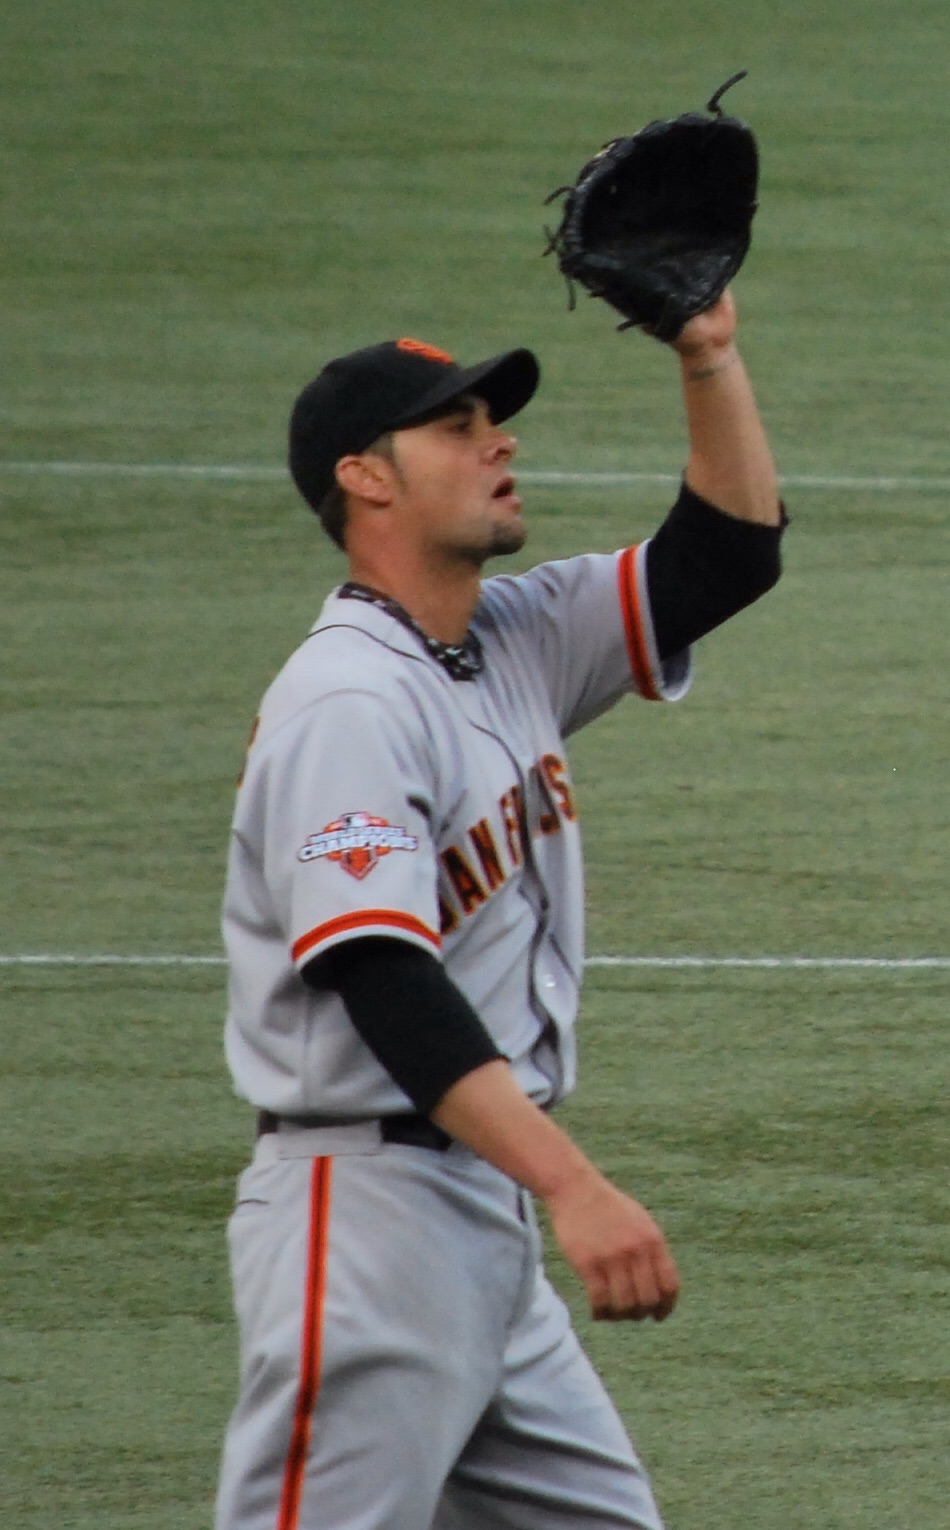 Vogelsong